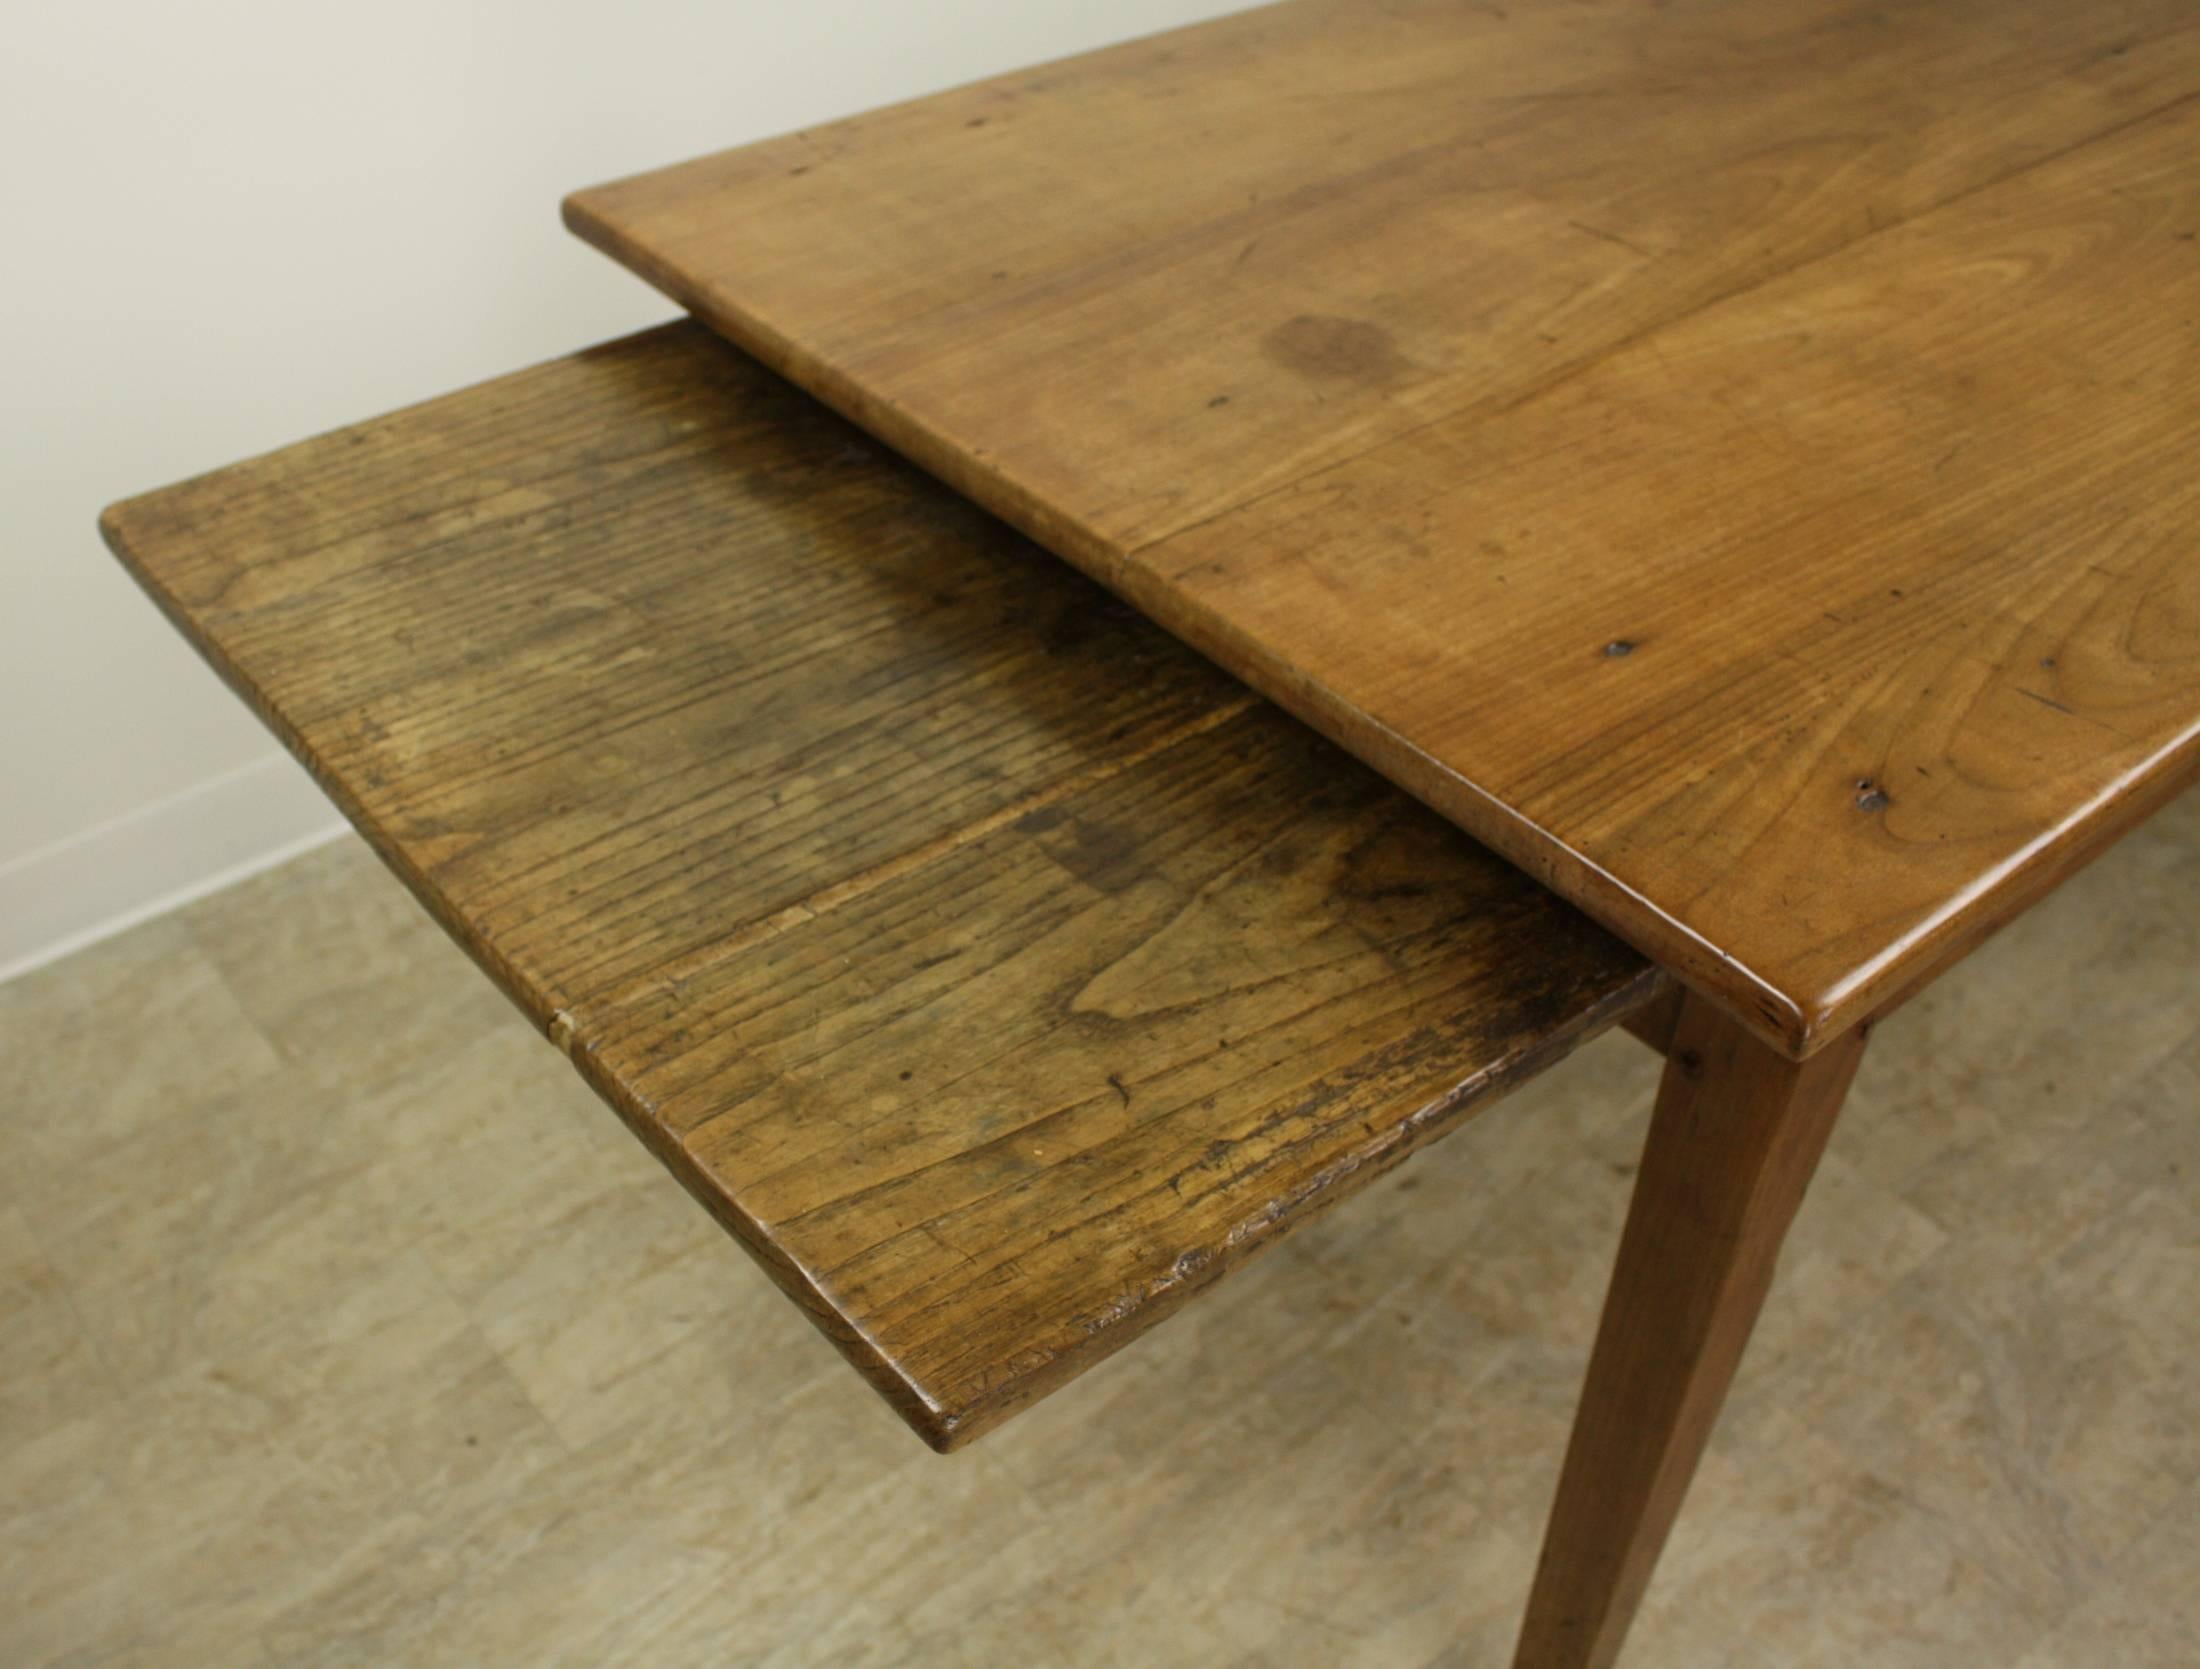 19th Century Antique Cherry Farm Table, One Drawer and Bread Slide